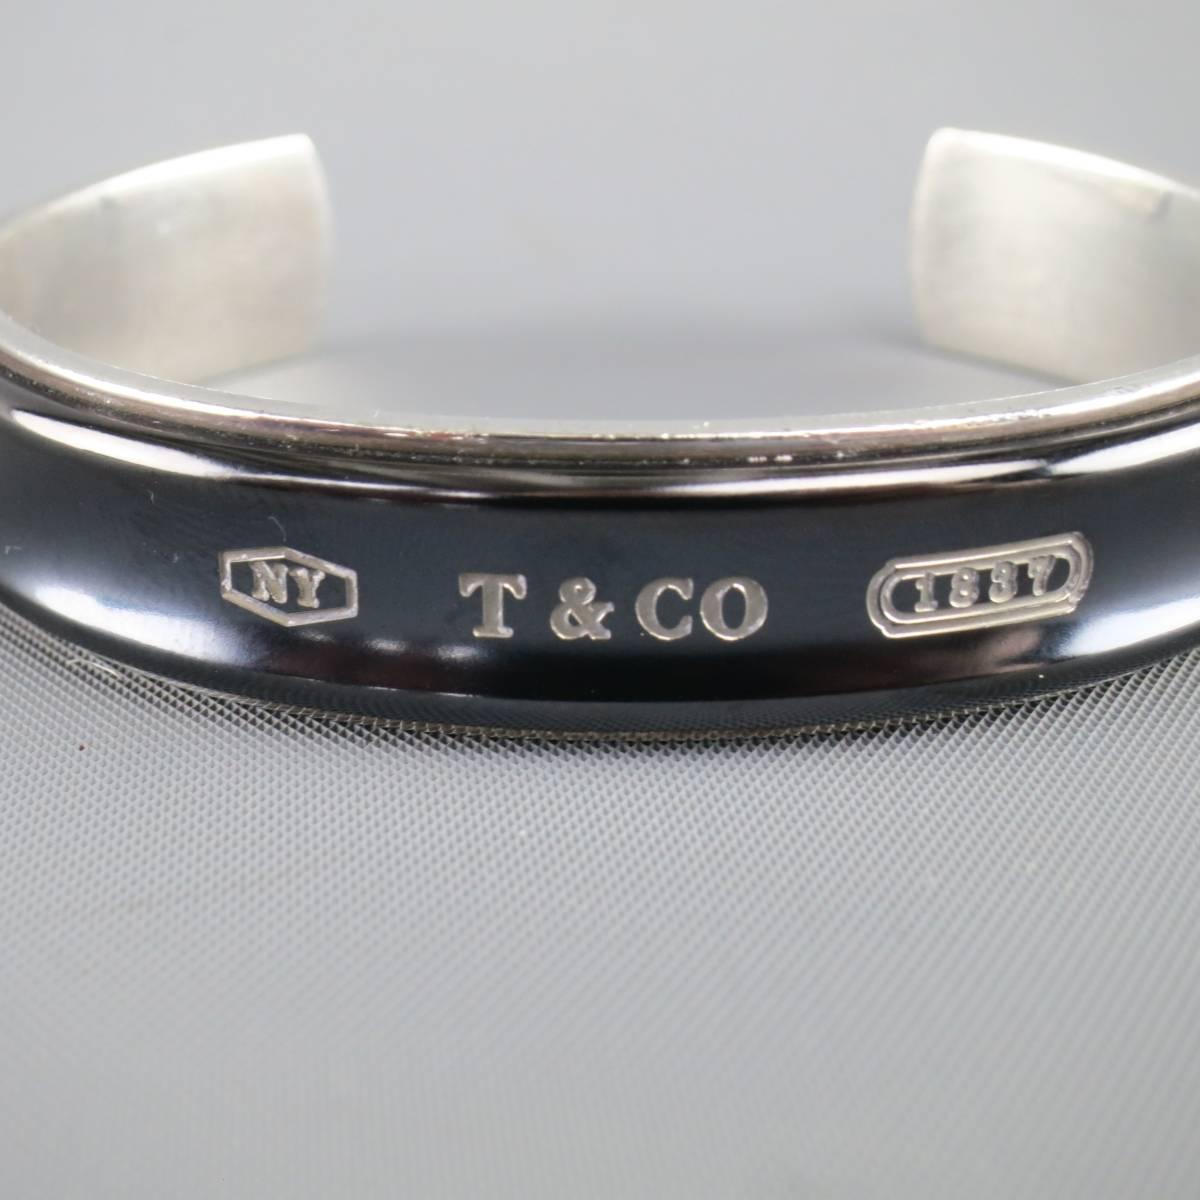 TIFFANY & CO. cuff bracelet in sterling silver featuring a midnight titanium band with 